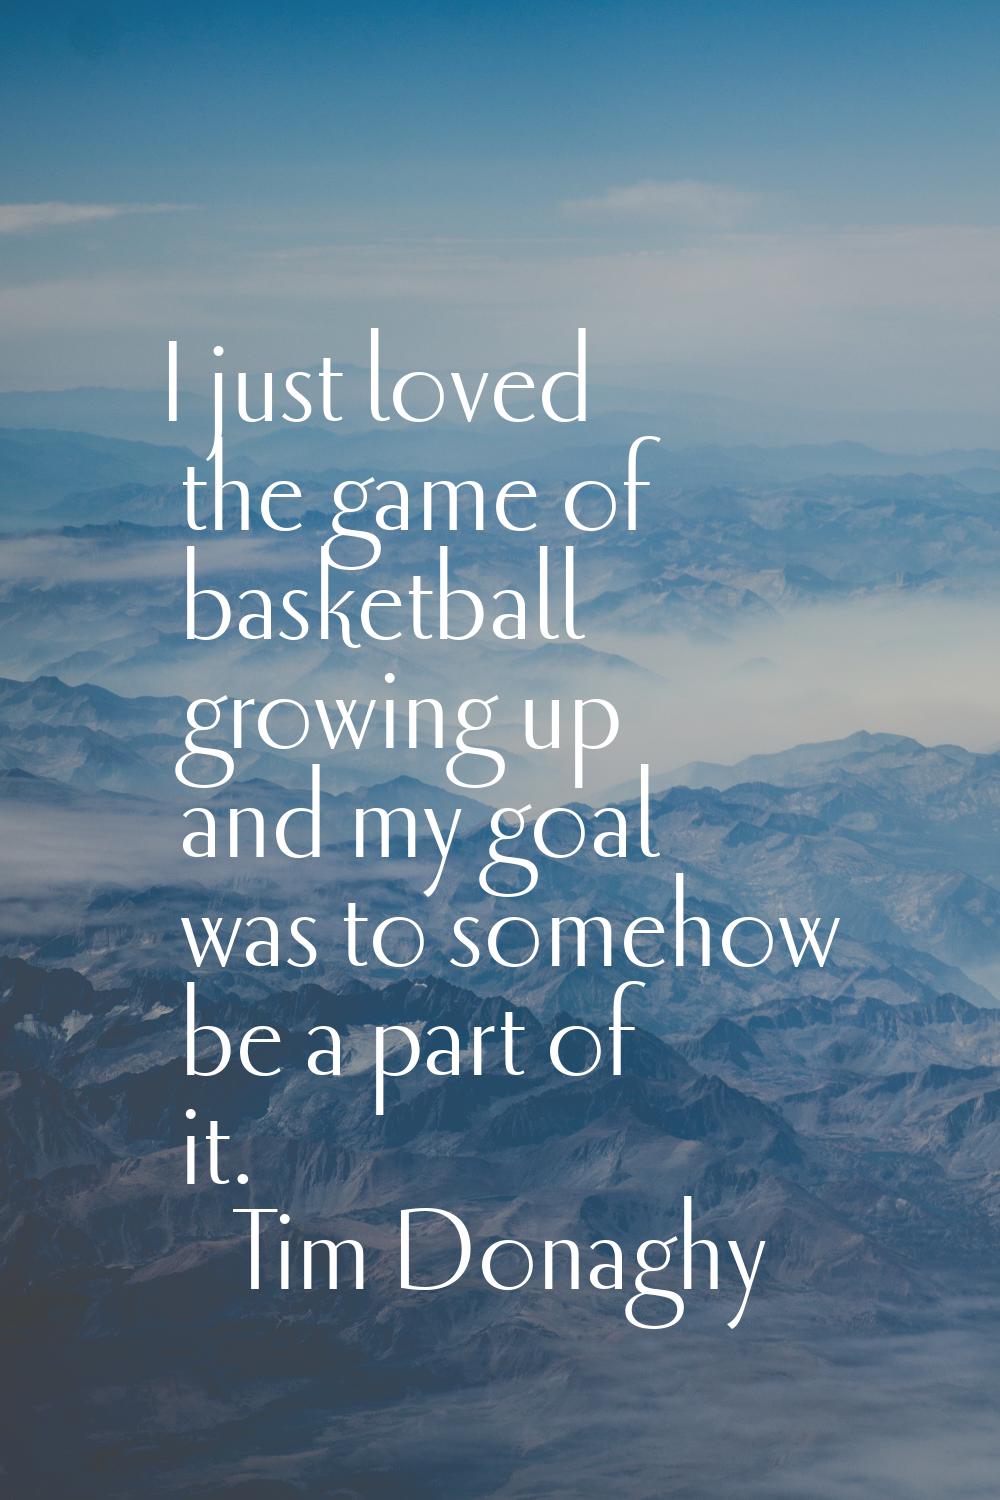 I just loved the game of basketball growing up and my goal was to somehow be a part of it.